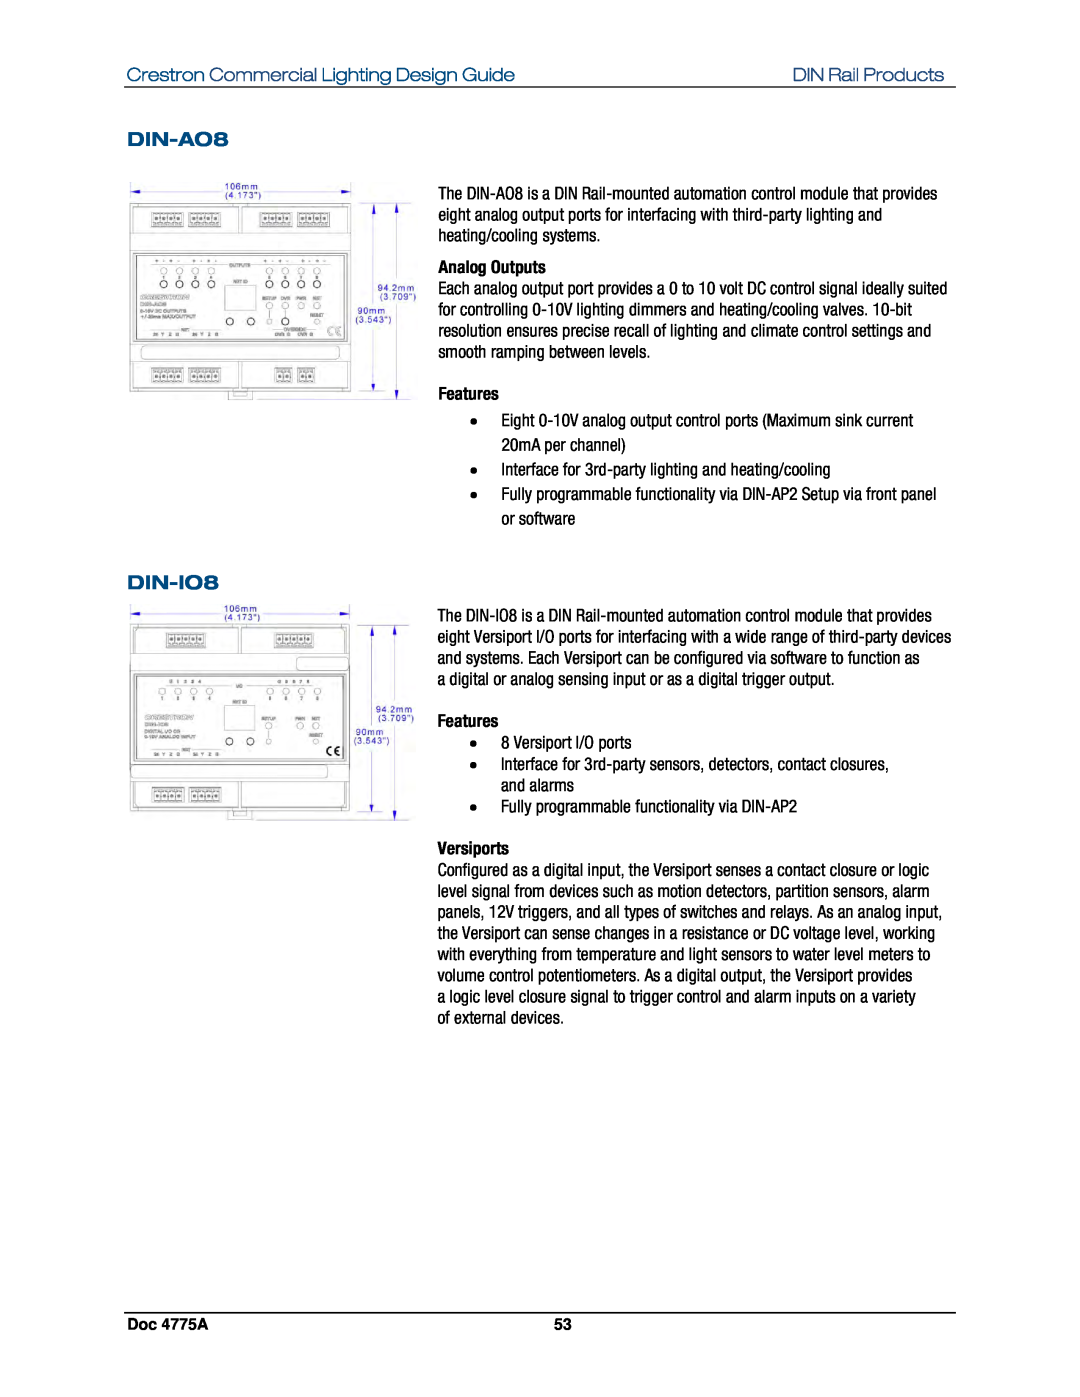 Crestron electronic GLPS-HSW manual DIN-AO8, DIN-IO8, Analog Outputs, Versiports, Crestron Commercial Lighting Design Guide 